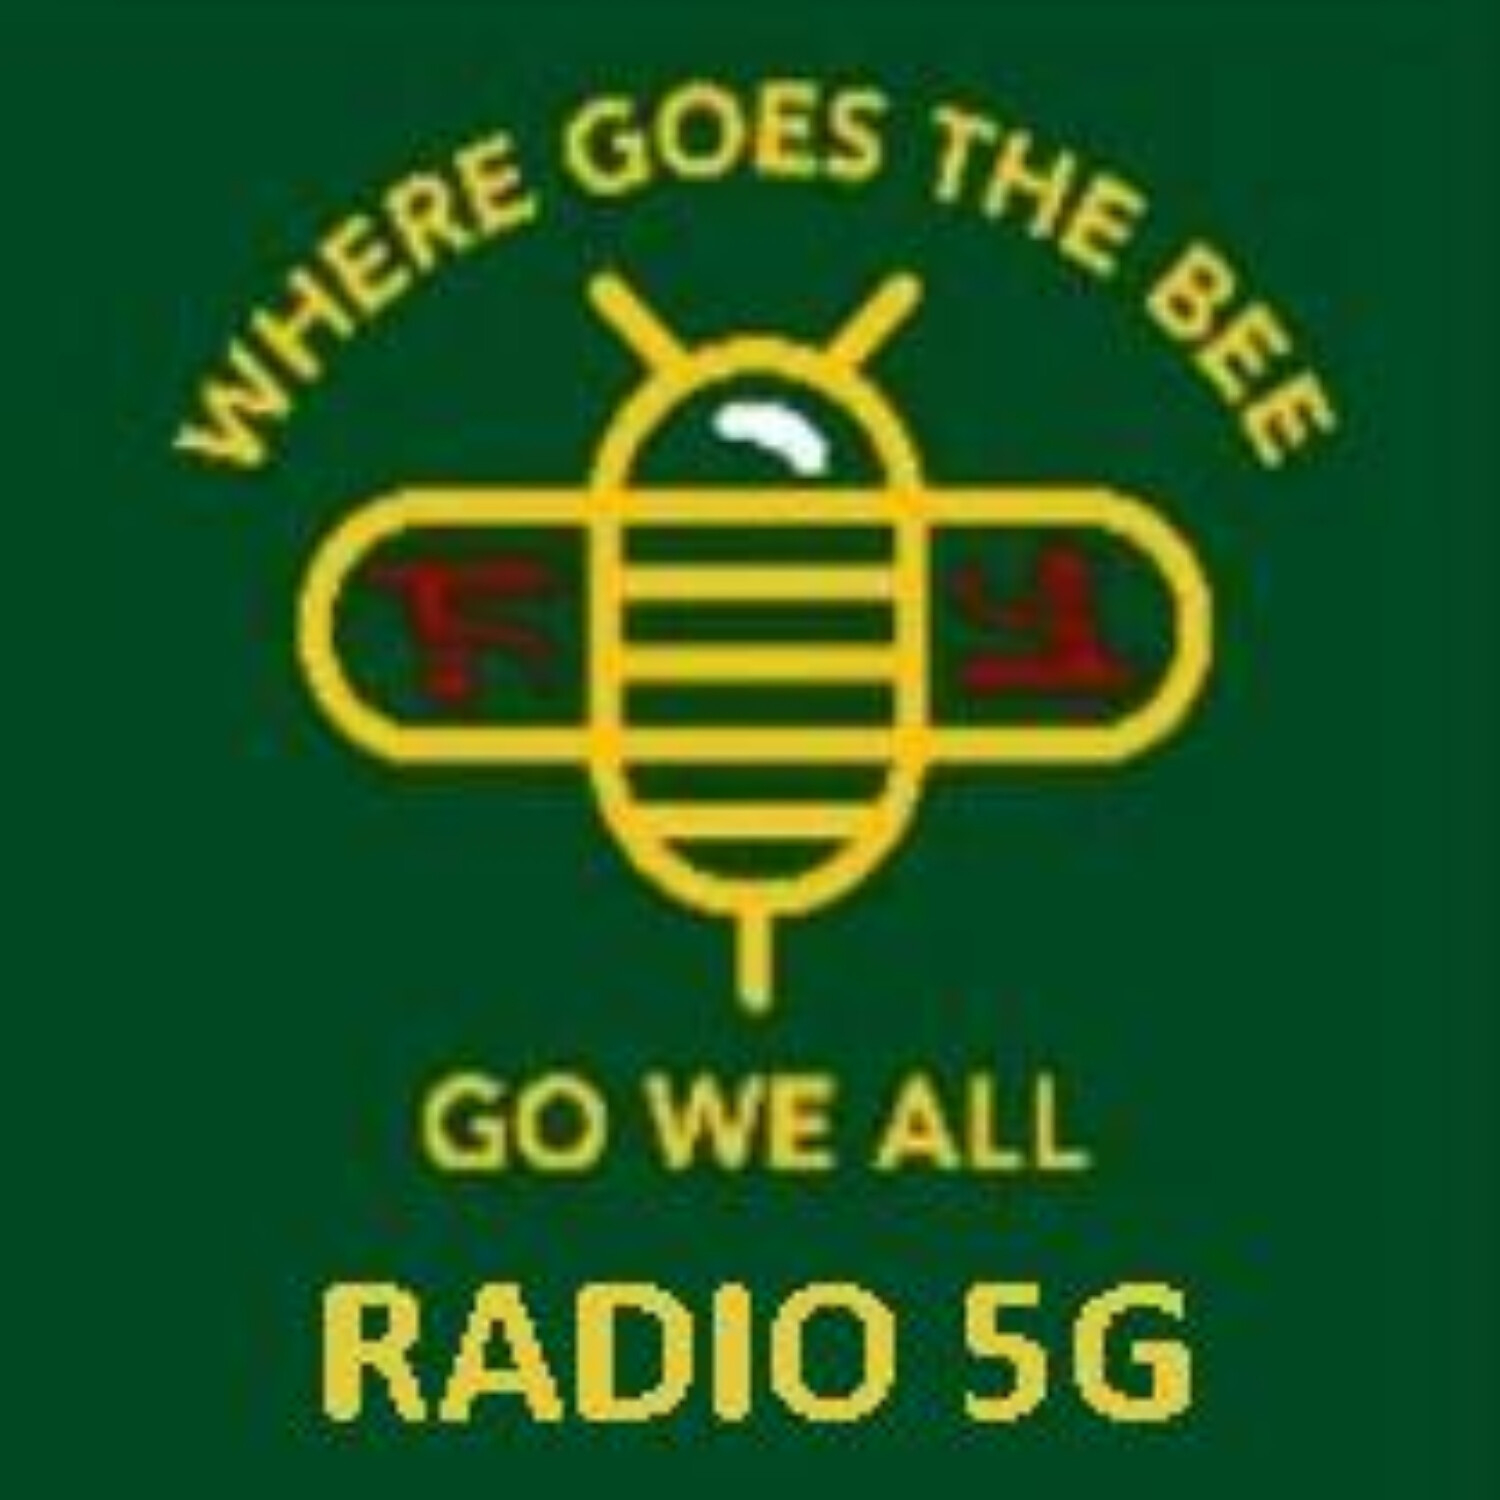 “RADIO 5G” 8/3/22 - Chris Knowles on Reality and Super Heroes